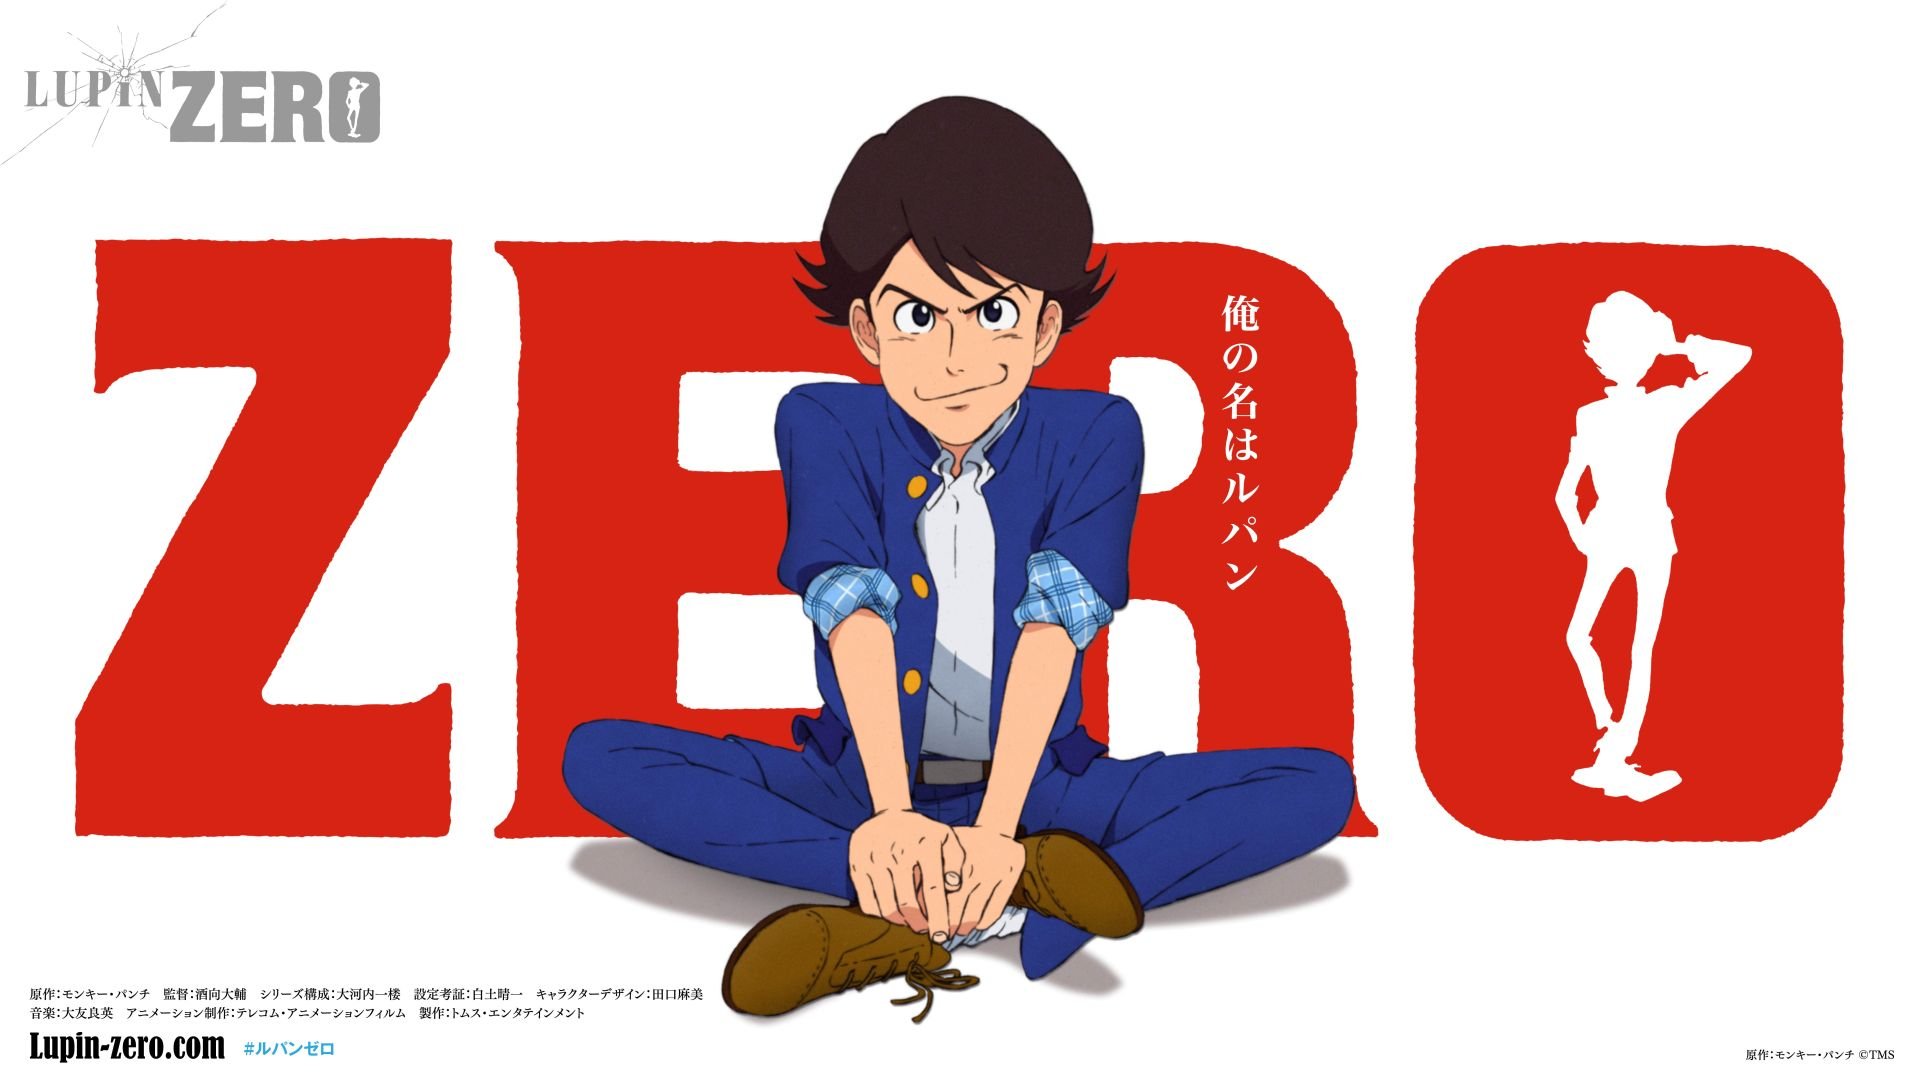 Cover image of Lupin The ZERO